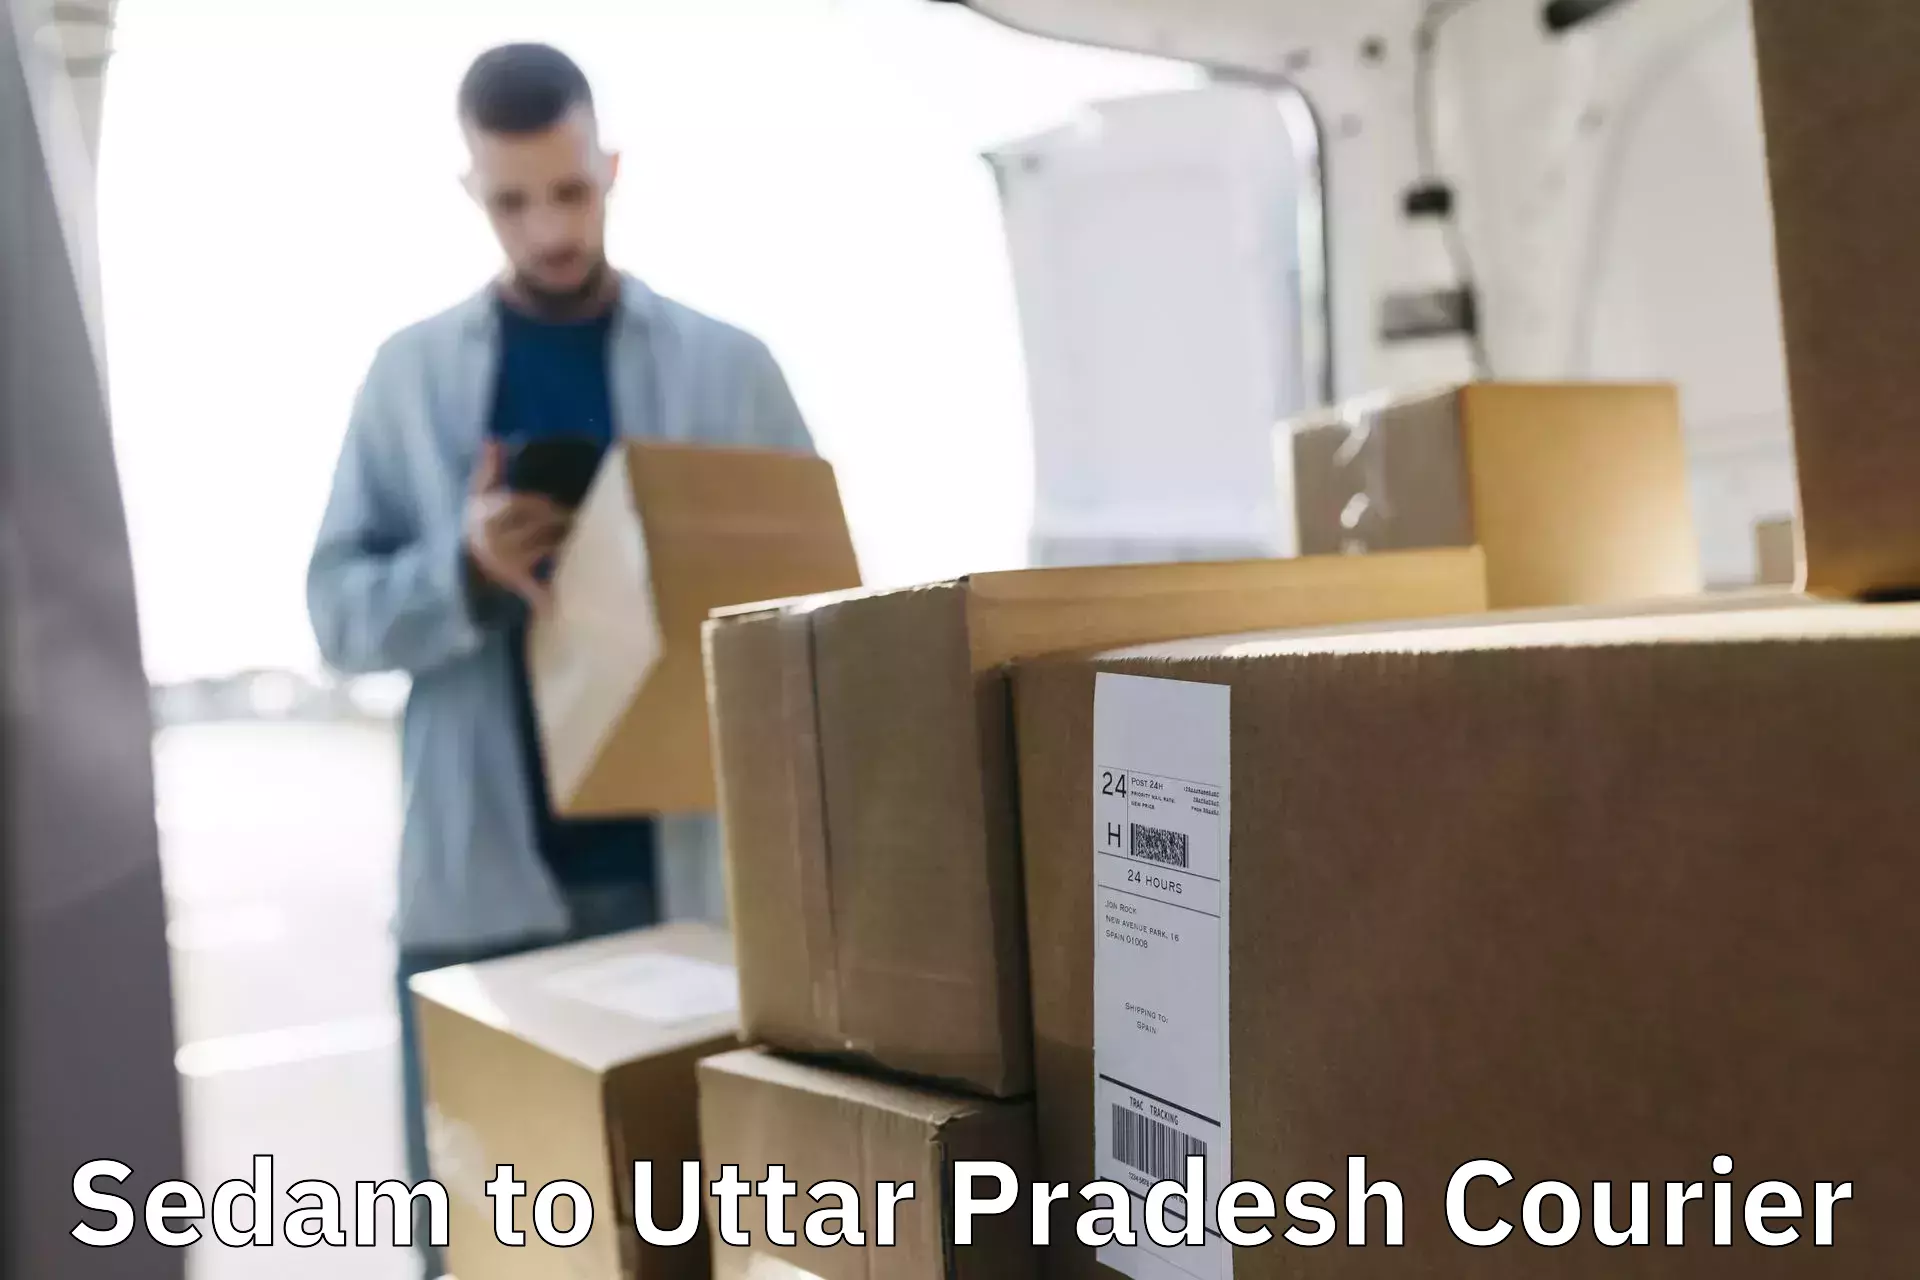 Large package courier Sedam to Salempur